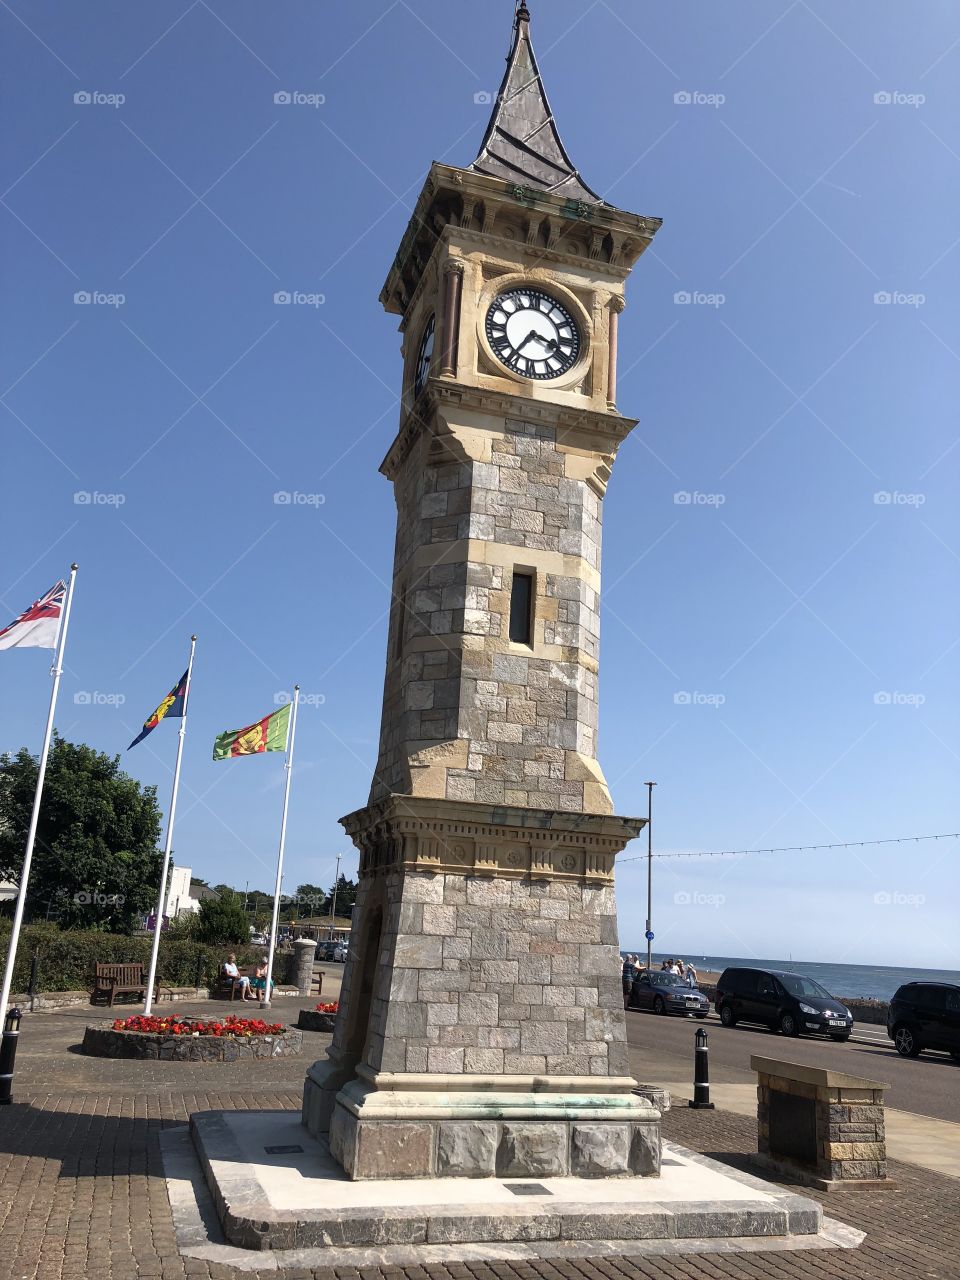 A fabulous shot of this very beautiful Exmouth, clock tower, it strikes an impressive pose.